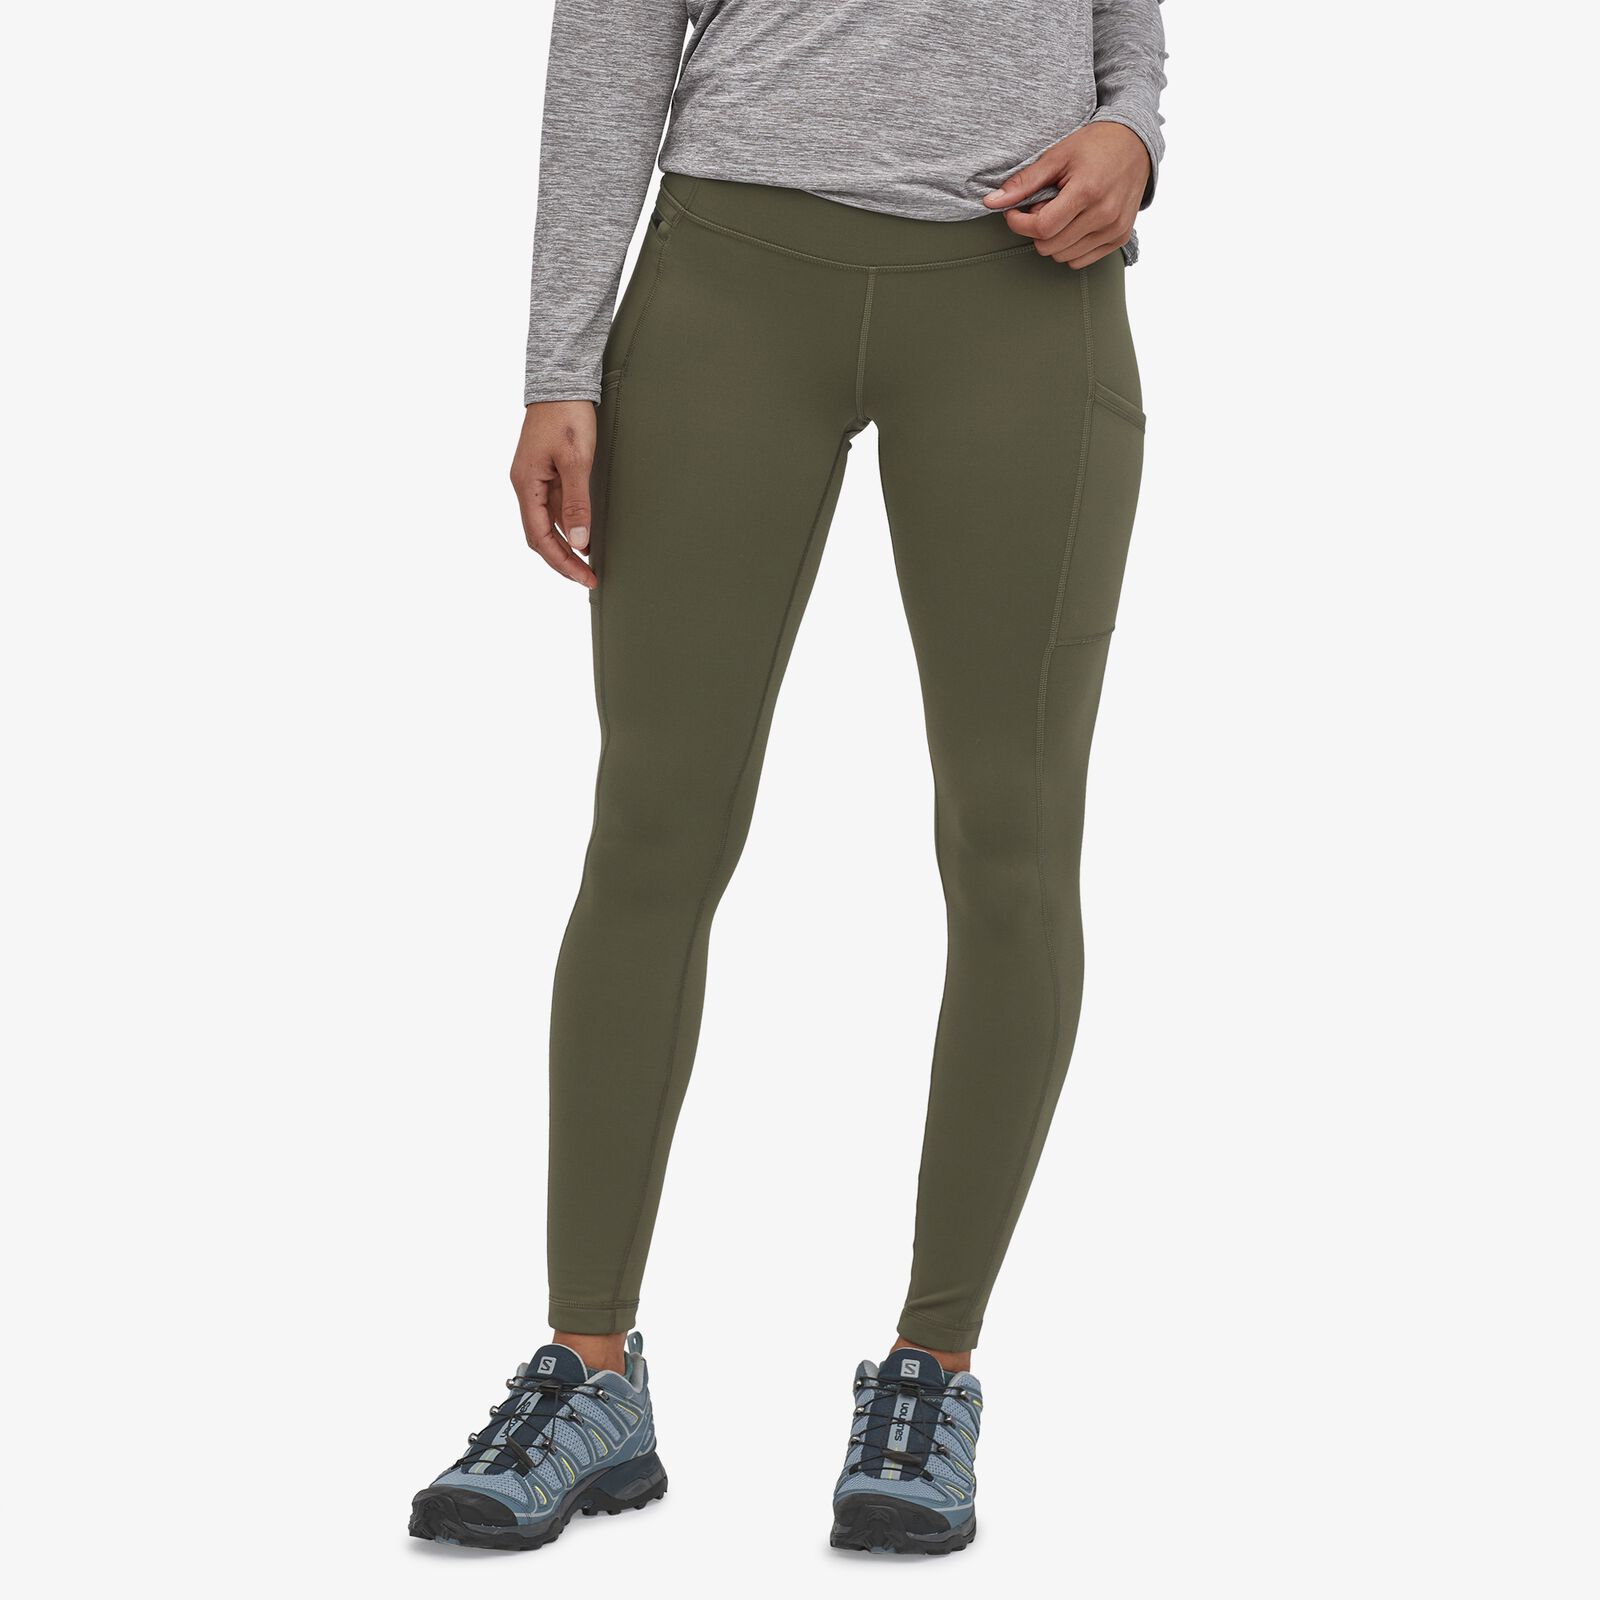 Patagonia Women's Pack Out Tights